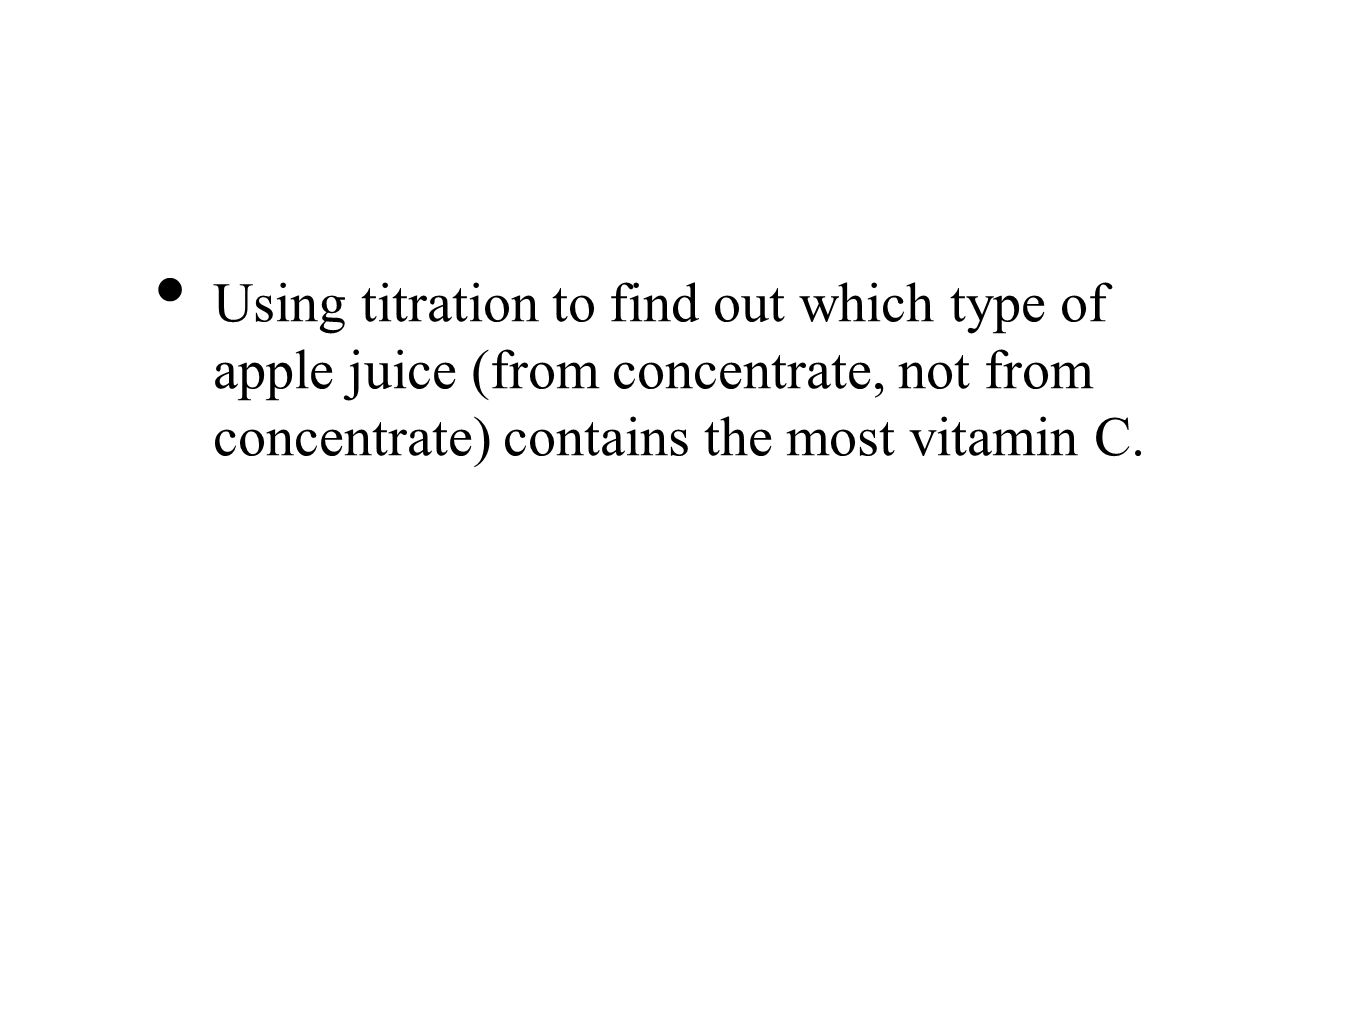 Using titration to find out which type of apple juice (from concentrate, not from concentrate) contains the most vitamin C.